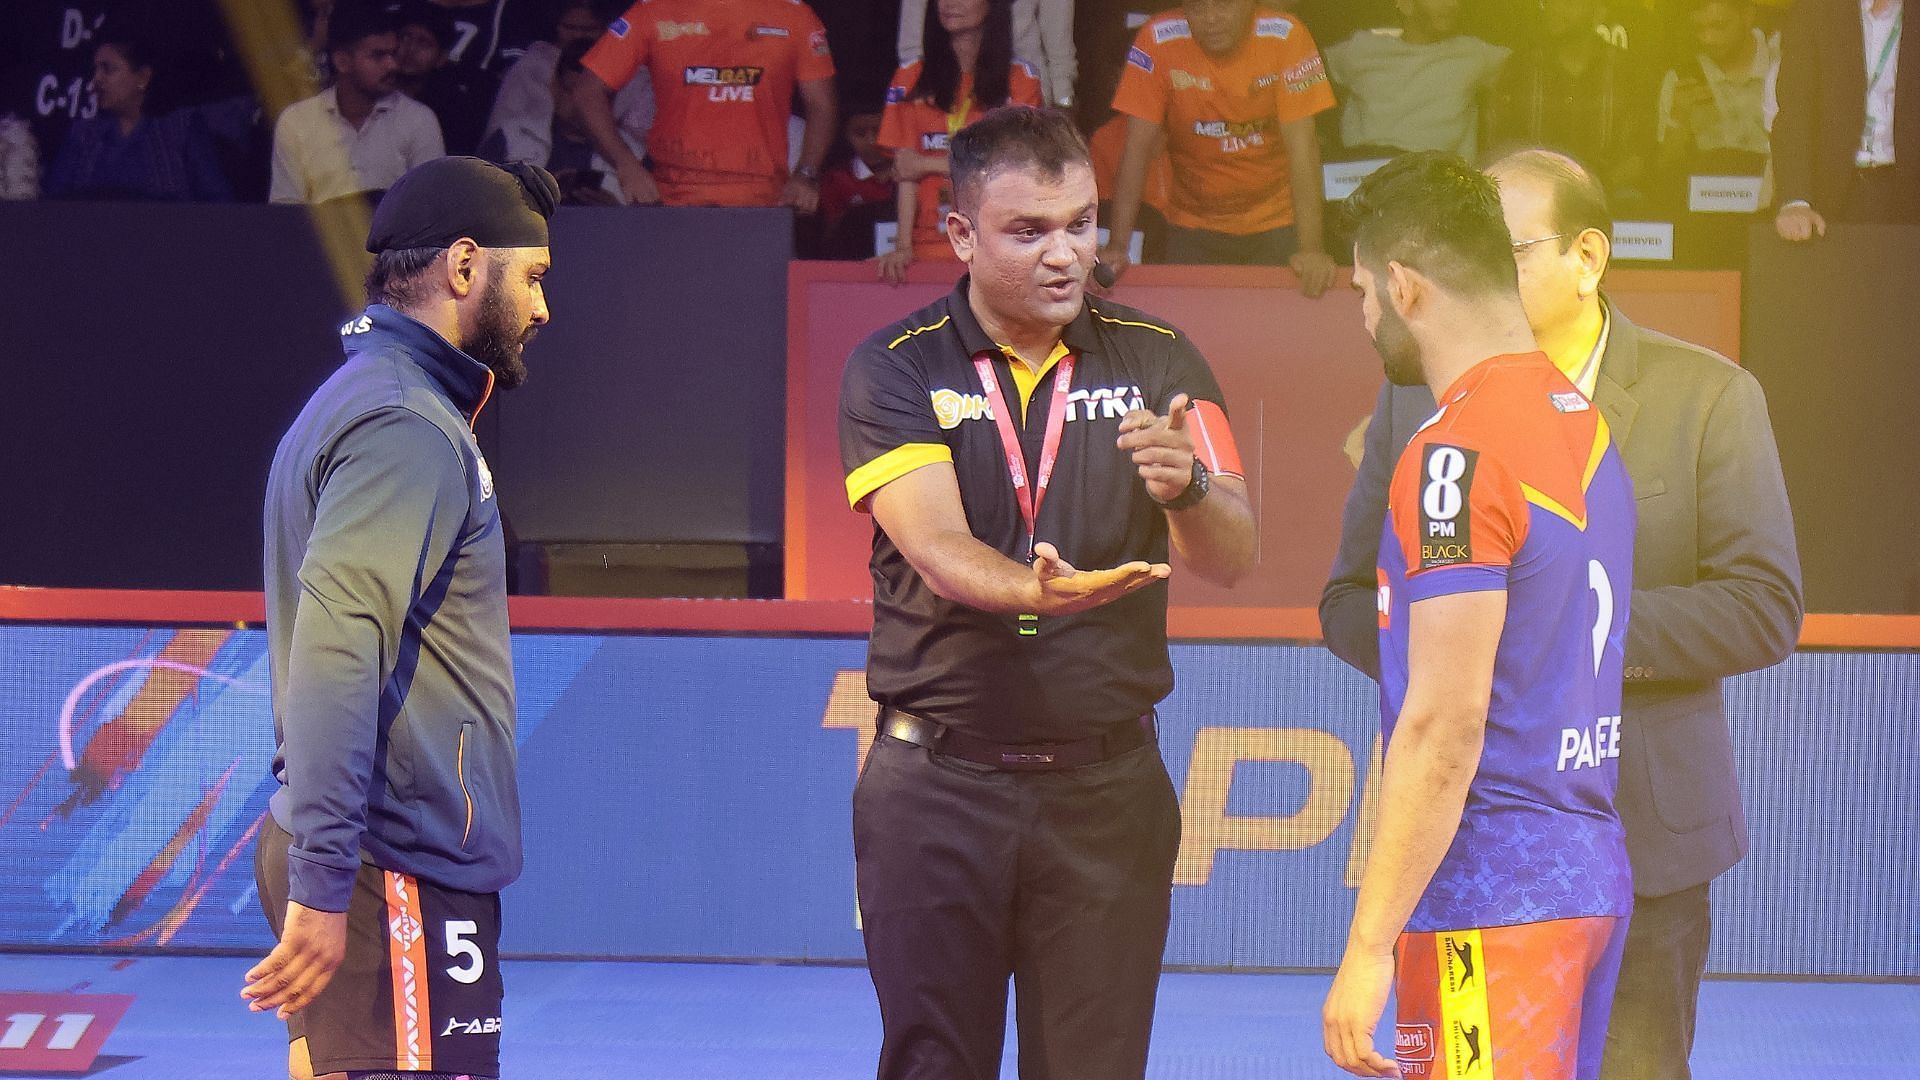 Surinder Singh and Pardeep Narwal at the toss (Image via PKL)